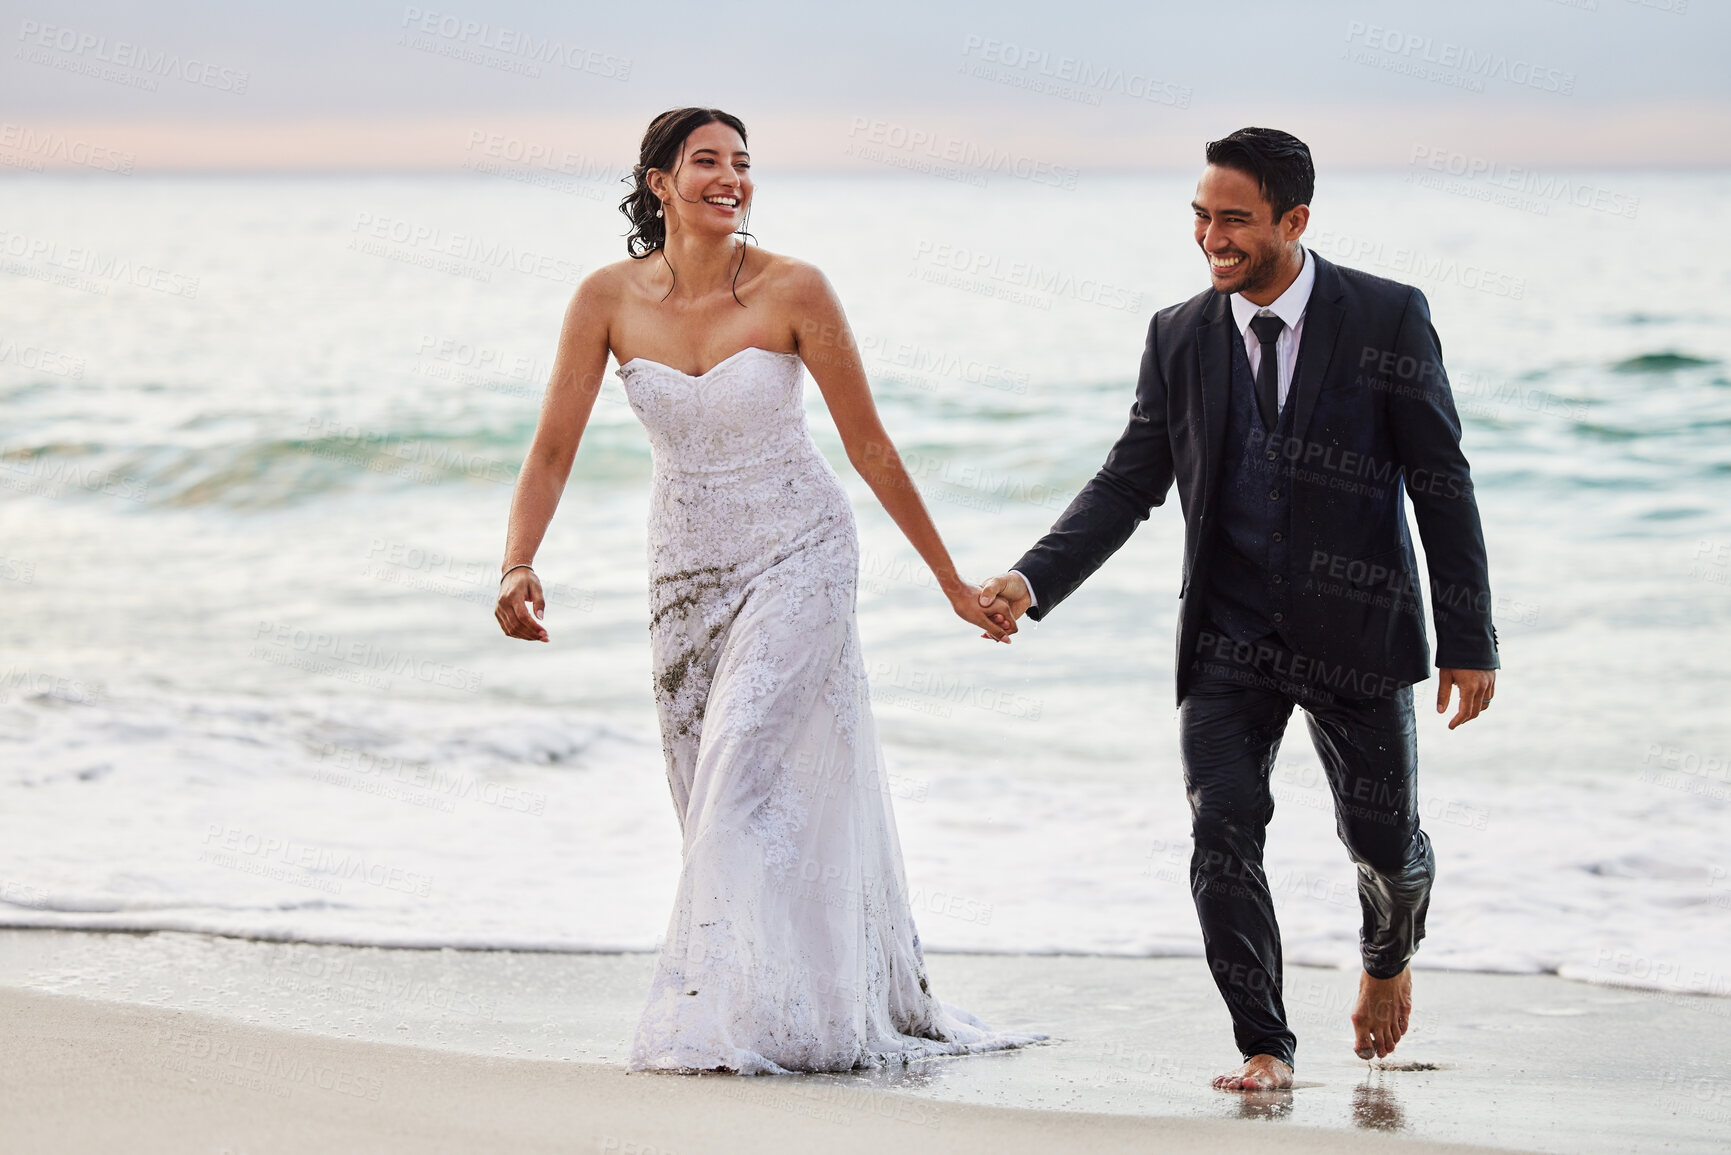 Buy stock photo Shot of a young couple on the beach on their wedding day